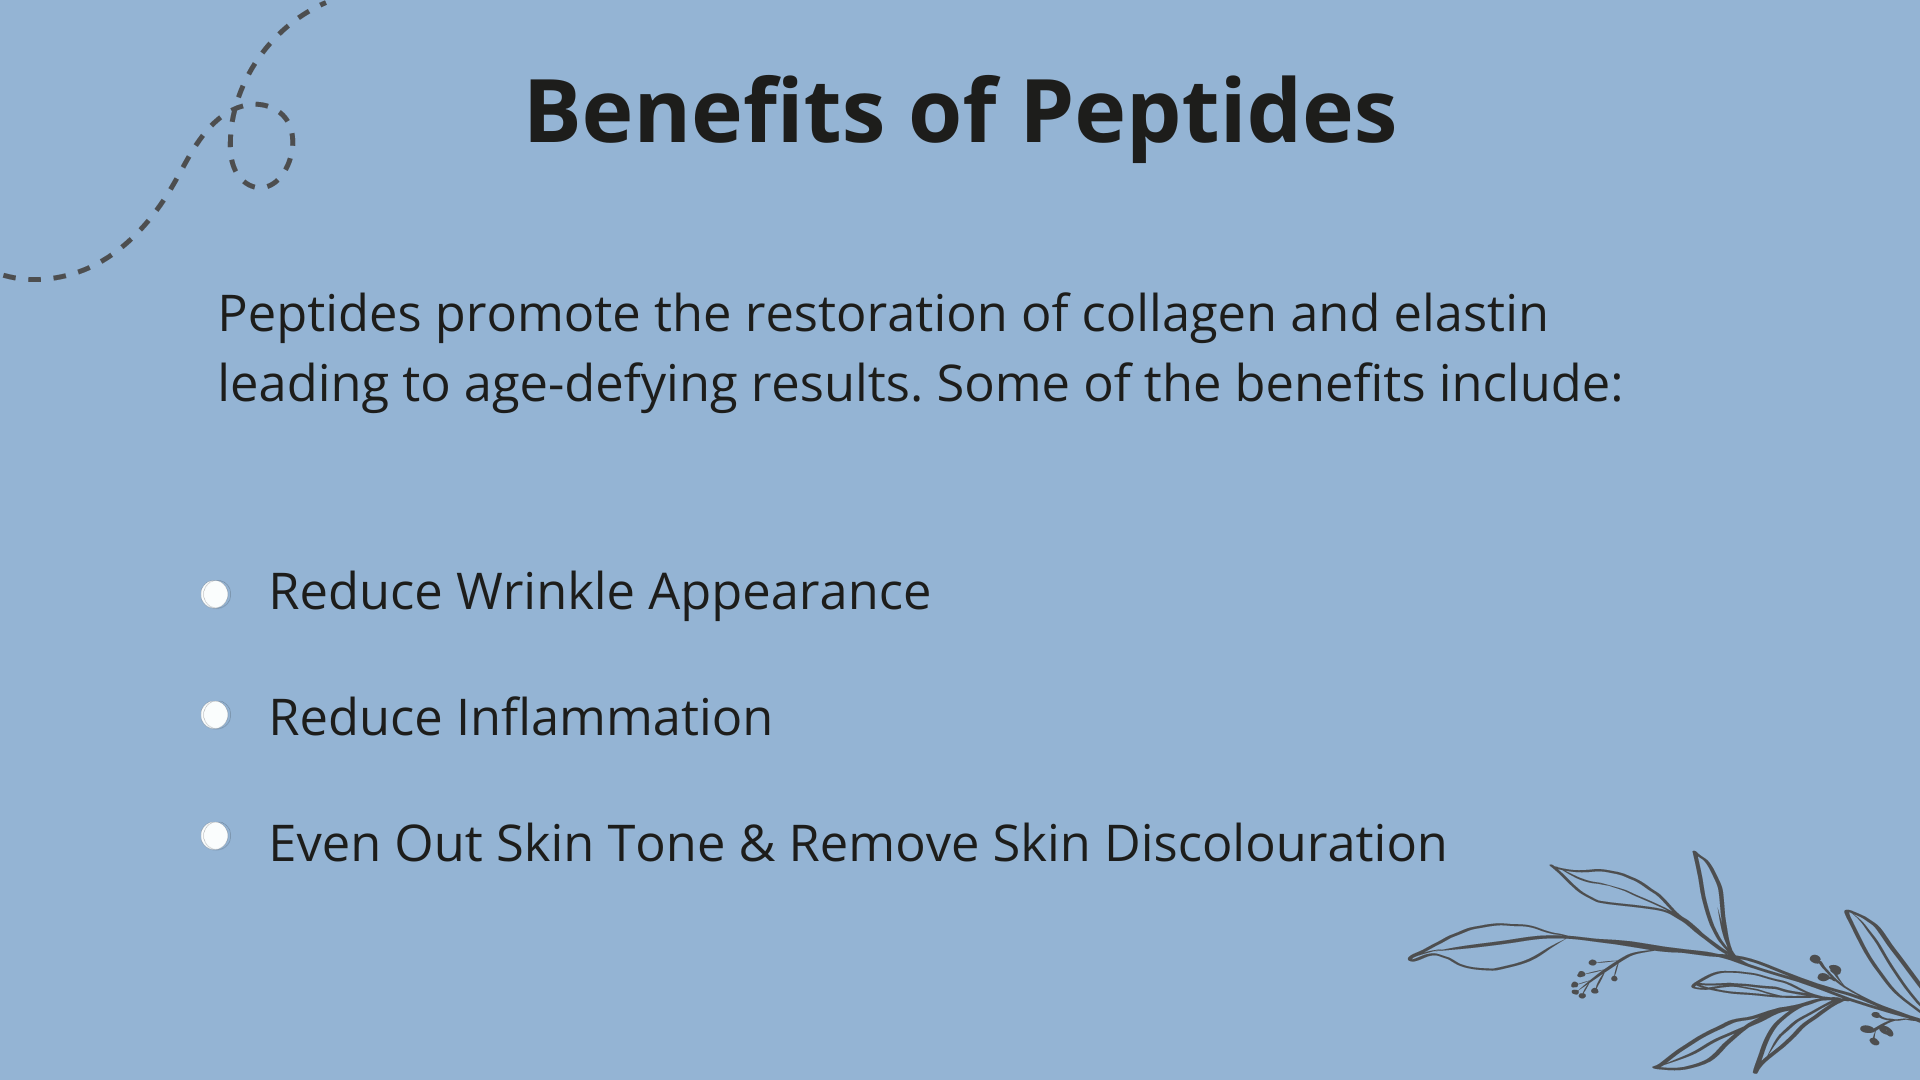 Benefits of Peptides